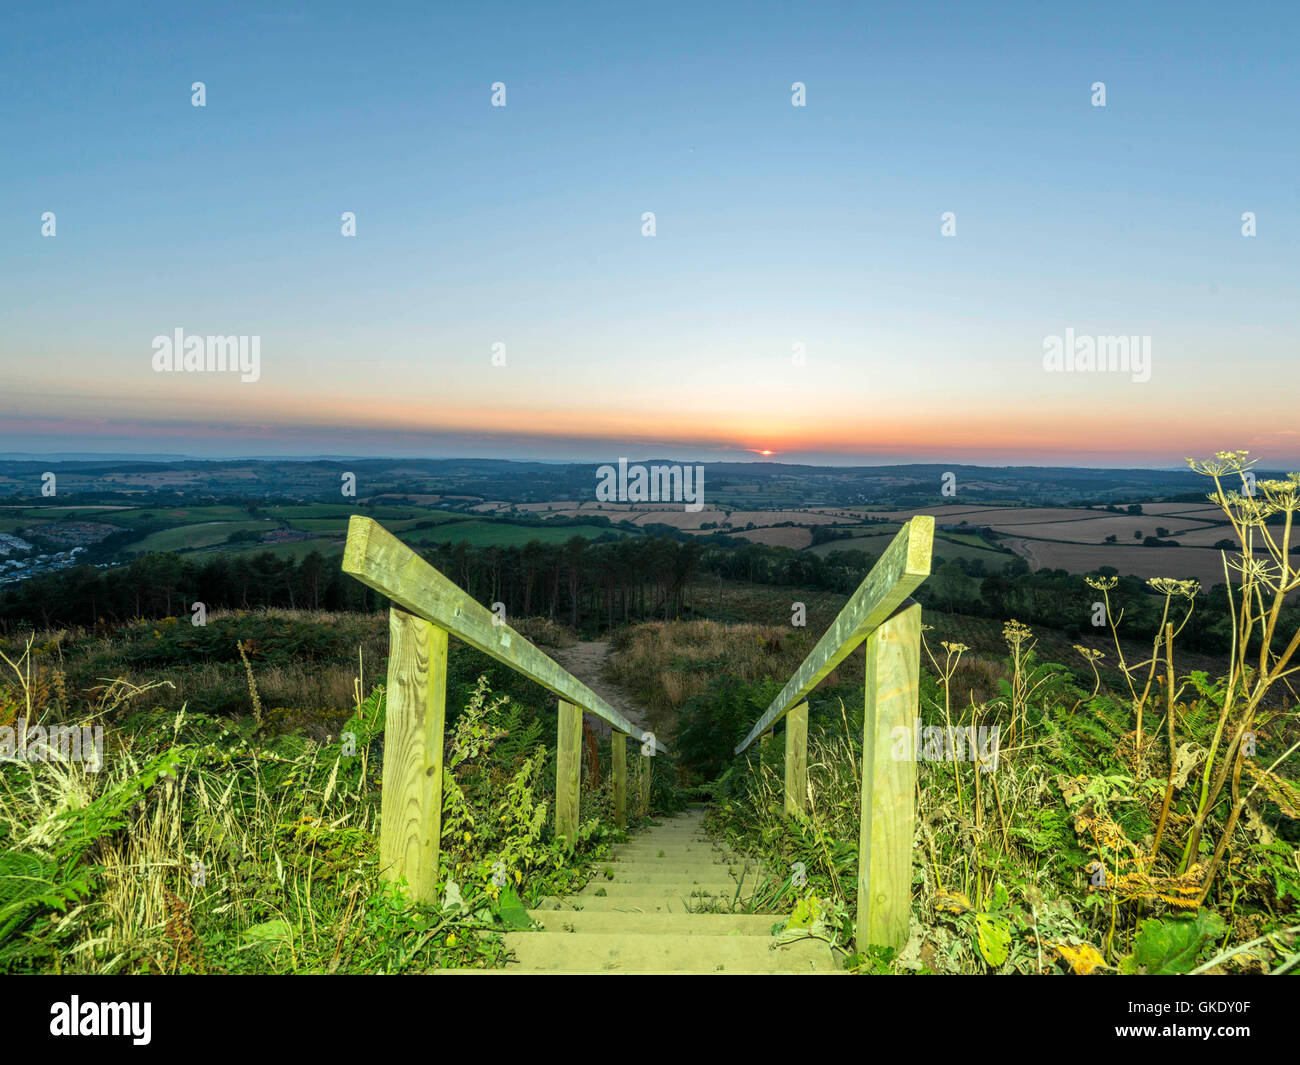 Landscape depicting the sunset over Devon countryside. Image taken at High Point wooden staircase viewing platform, Ladram Bay Stock Photo